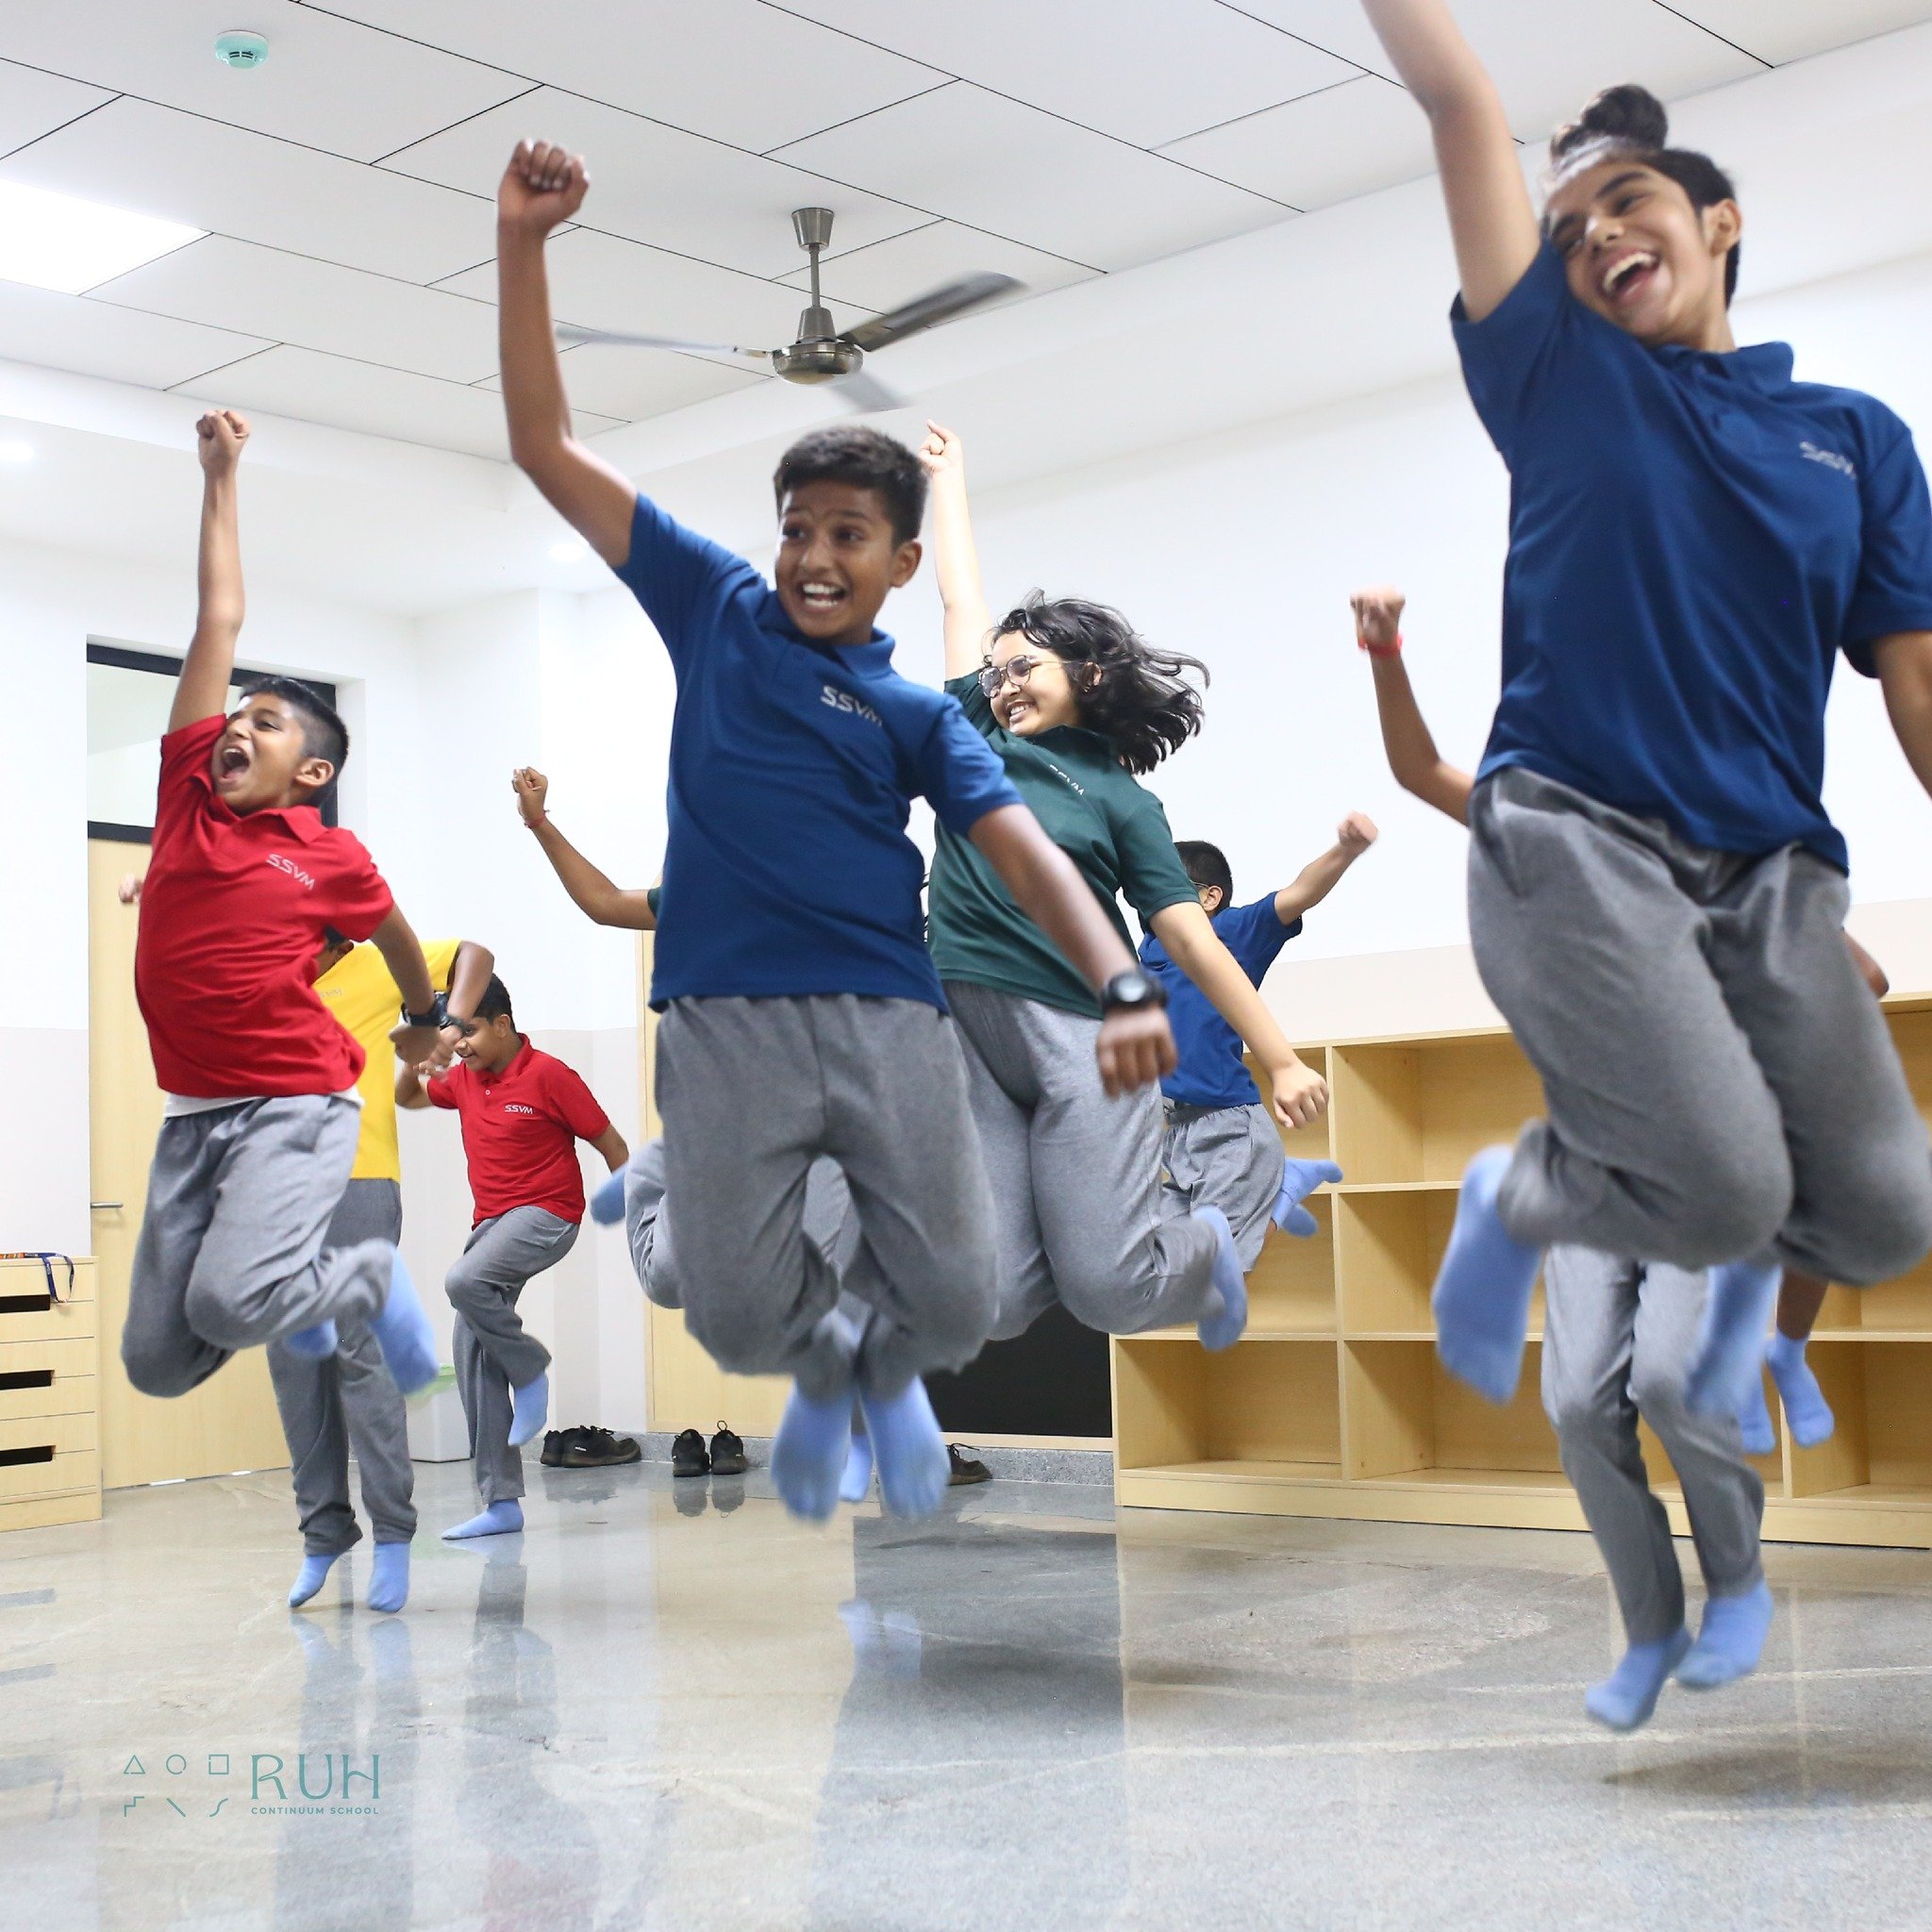 It's International Dance Day, and here at Ruh, we're getting our groove on! Dancing isn't just about fancy moves&mdash;it's about finding our voices and feeling awesome.

Our Ruh'lers twirl and leap, learning to be confident, work together, and expre